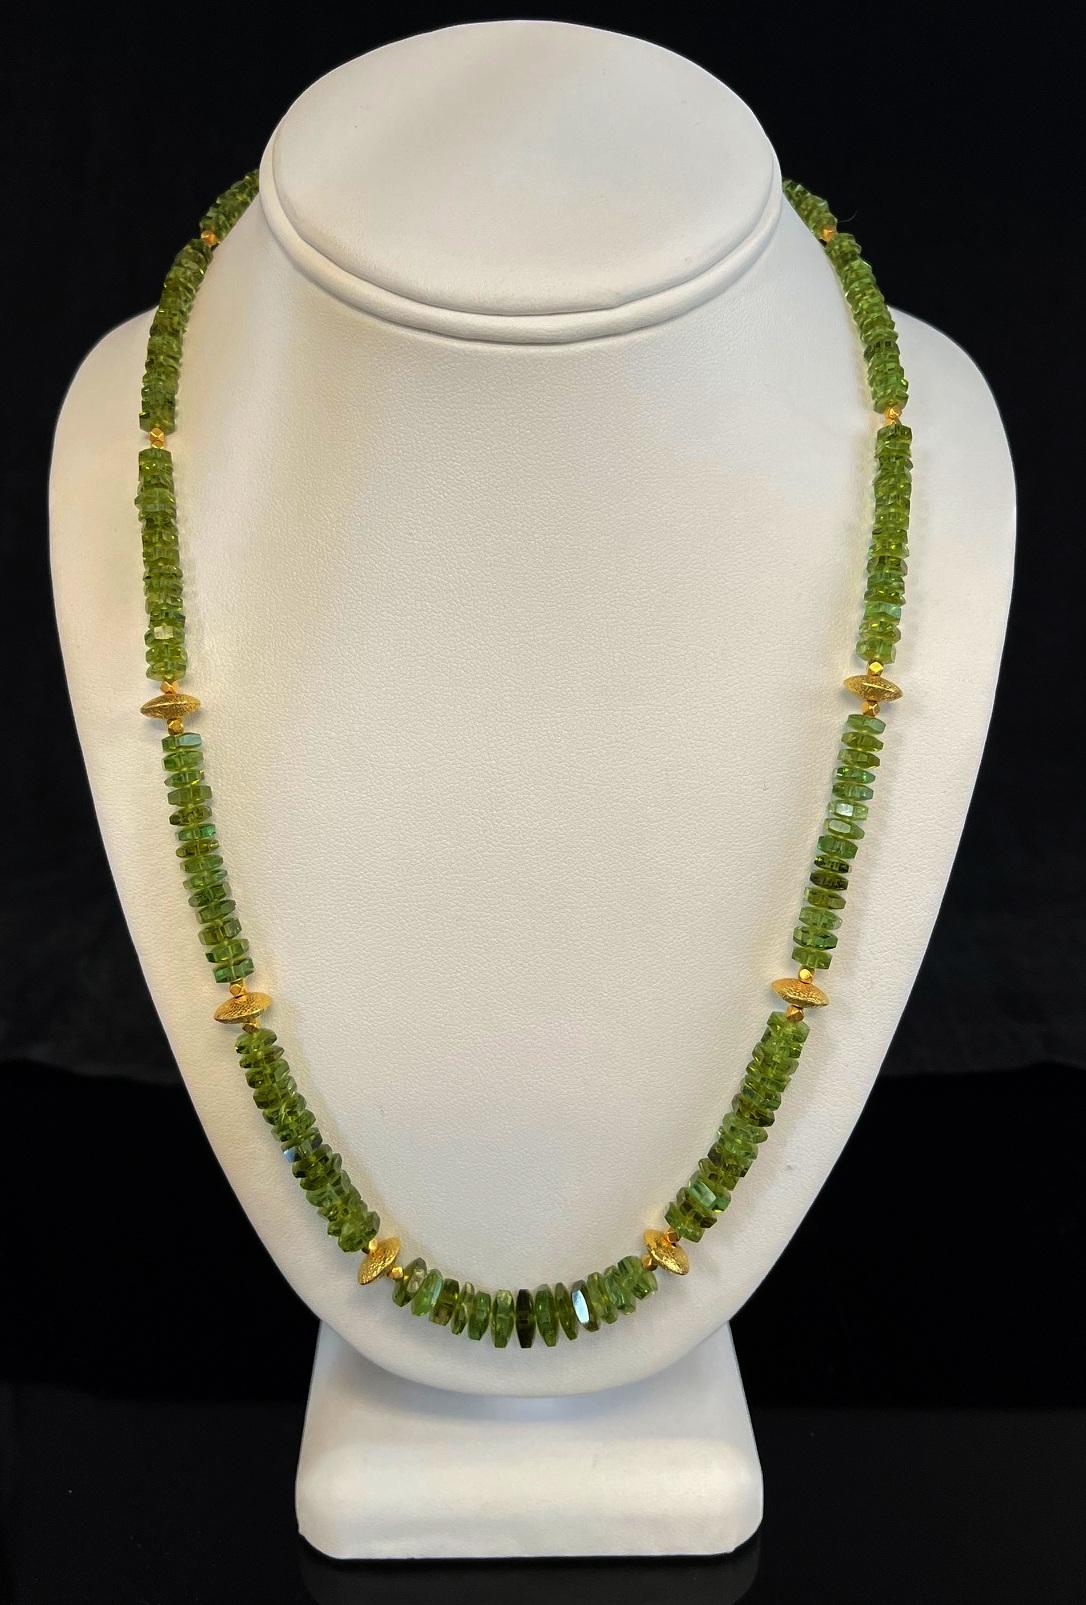 Green Tourmaline Bead and 18k Yellow Gold Necklace, Adjustable Length For Sale 3